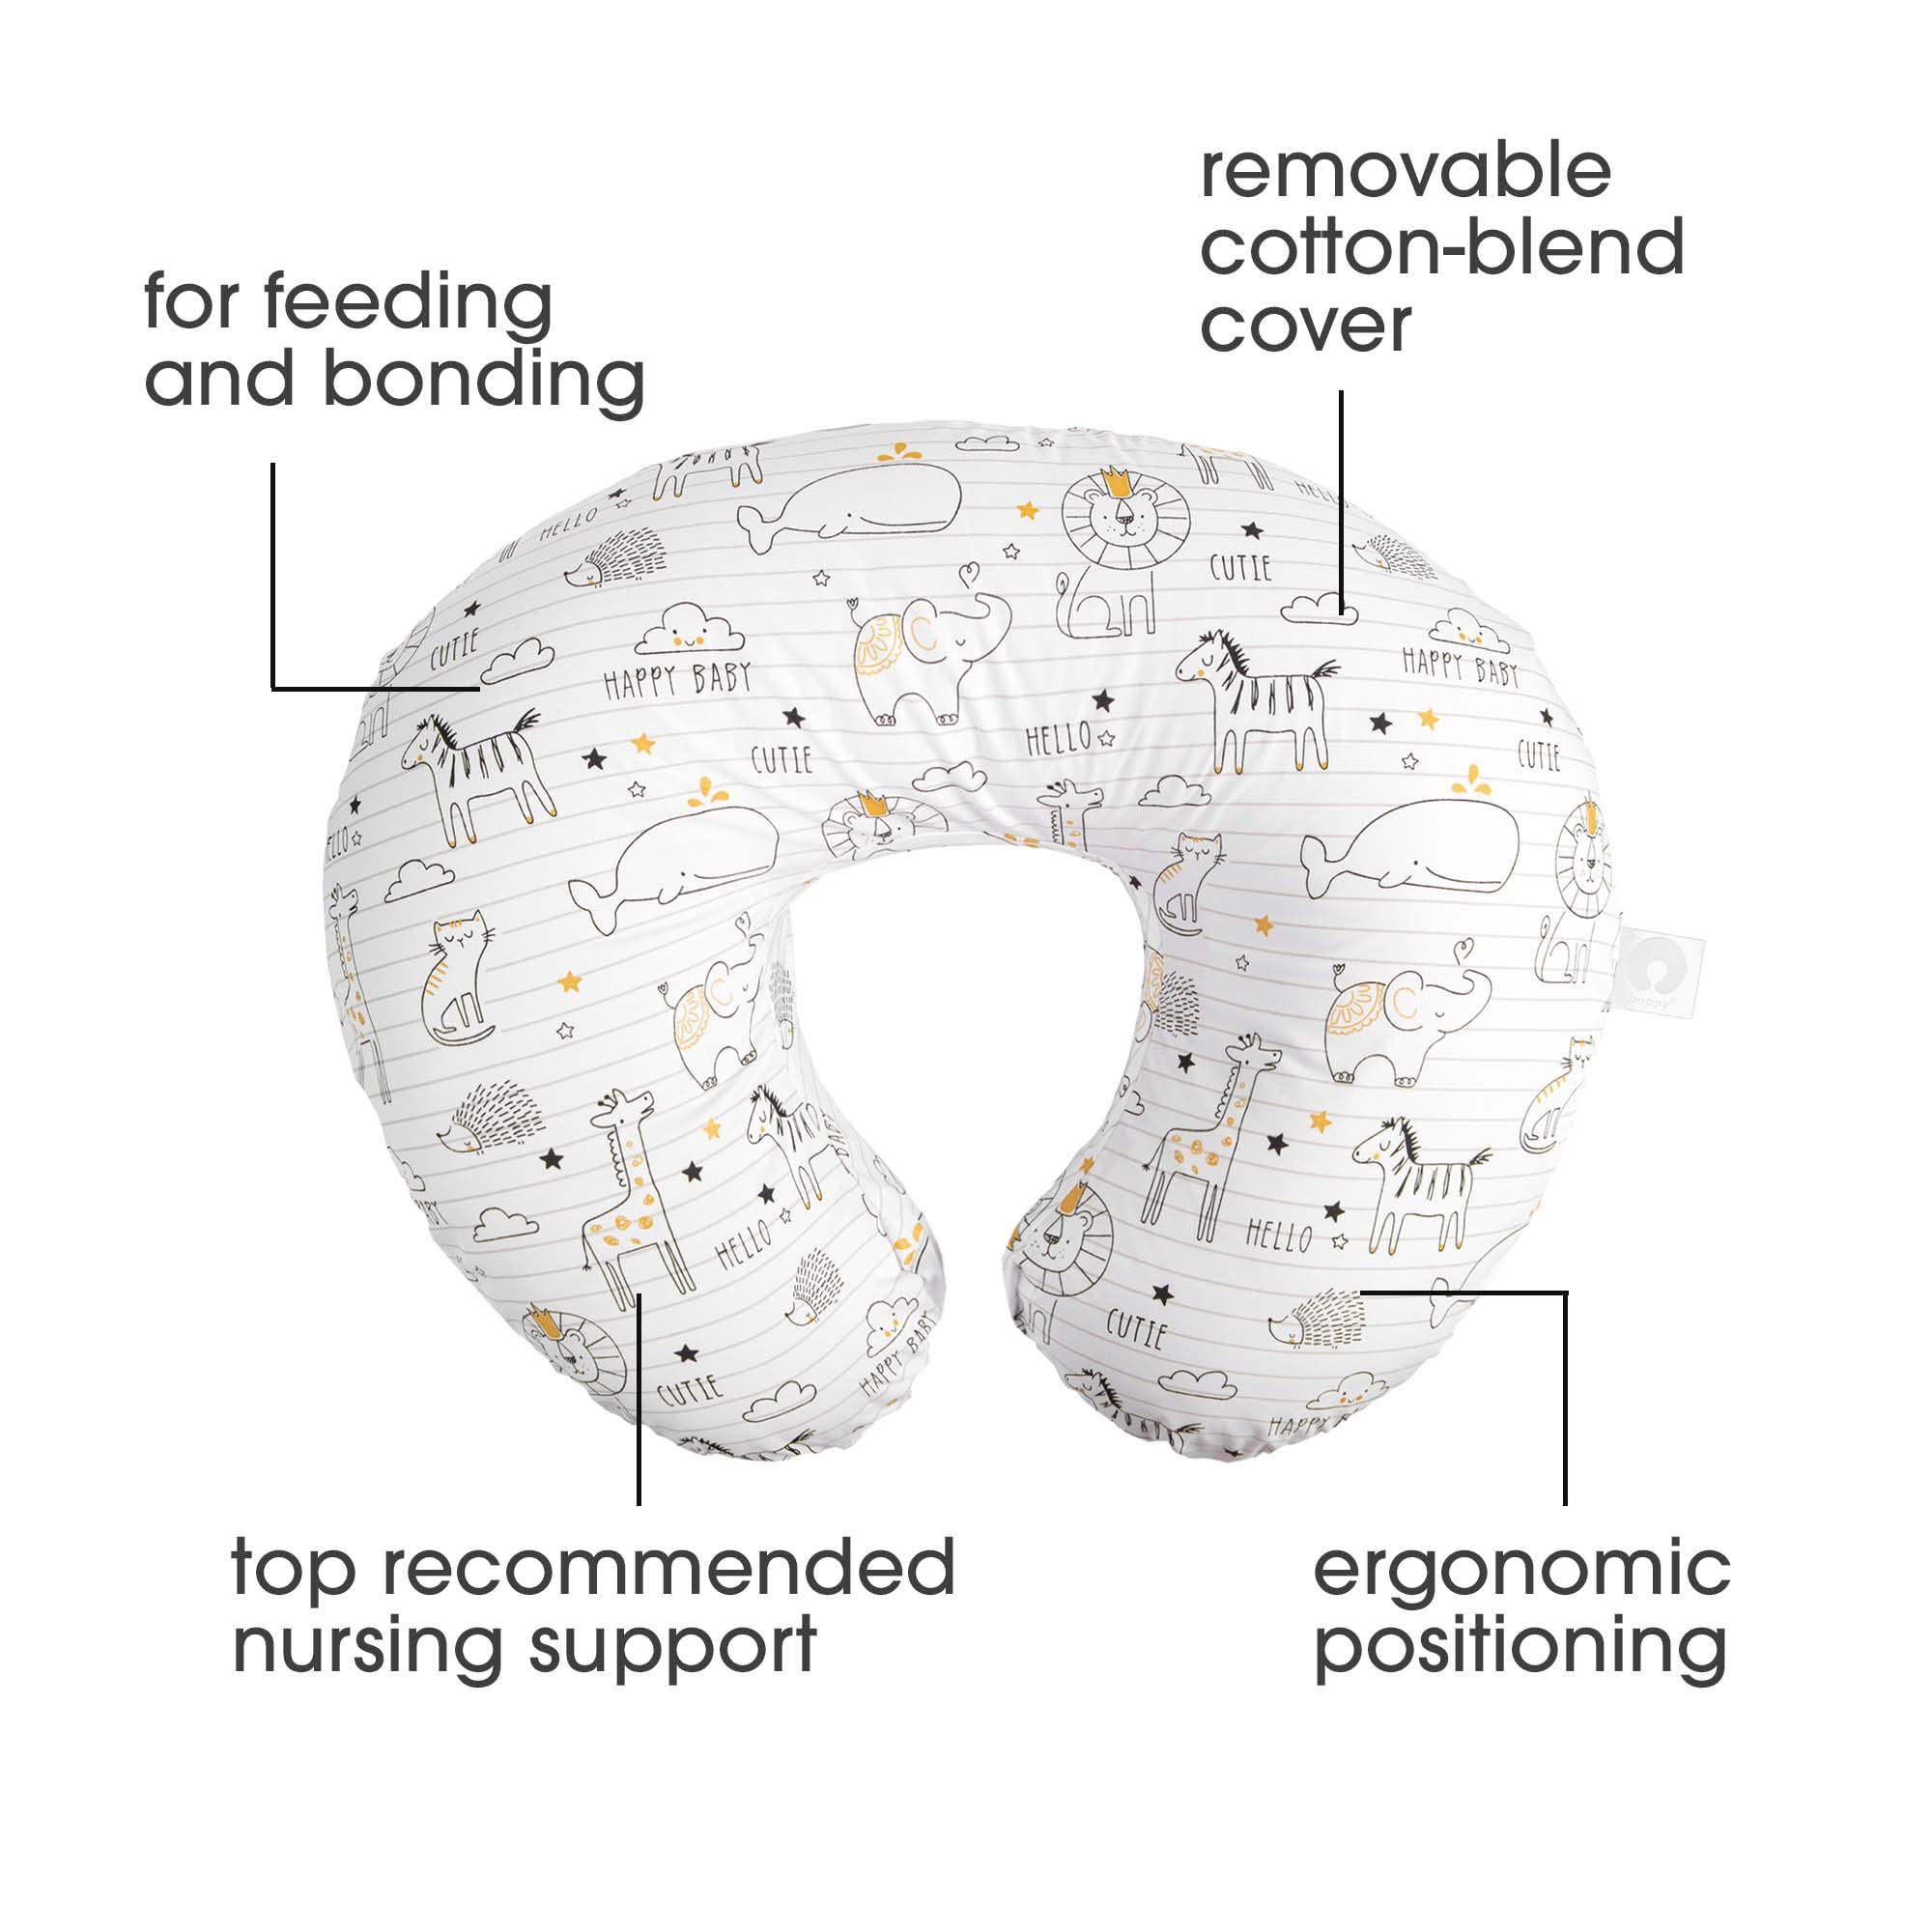 Boppy Nursing Pillow Original Support, White and Gold Notebook, Ergonomic Nursing Essentials for Bottle and Breastfeeding, Firm Fiber Fill, with Removable Nursing Pillow Cover, Machine Washable